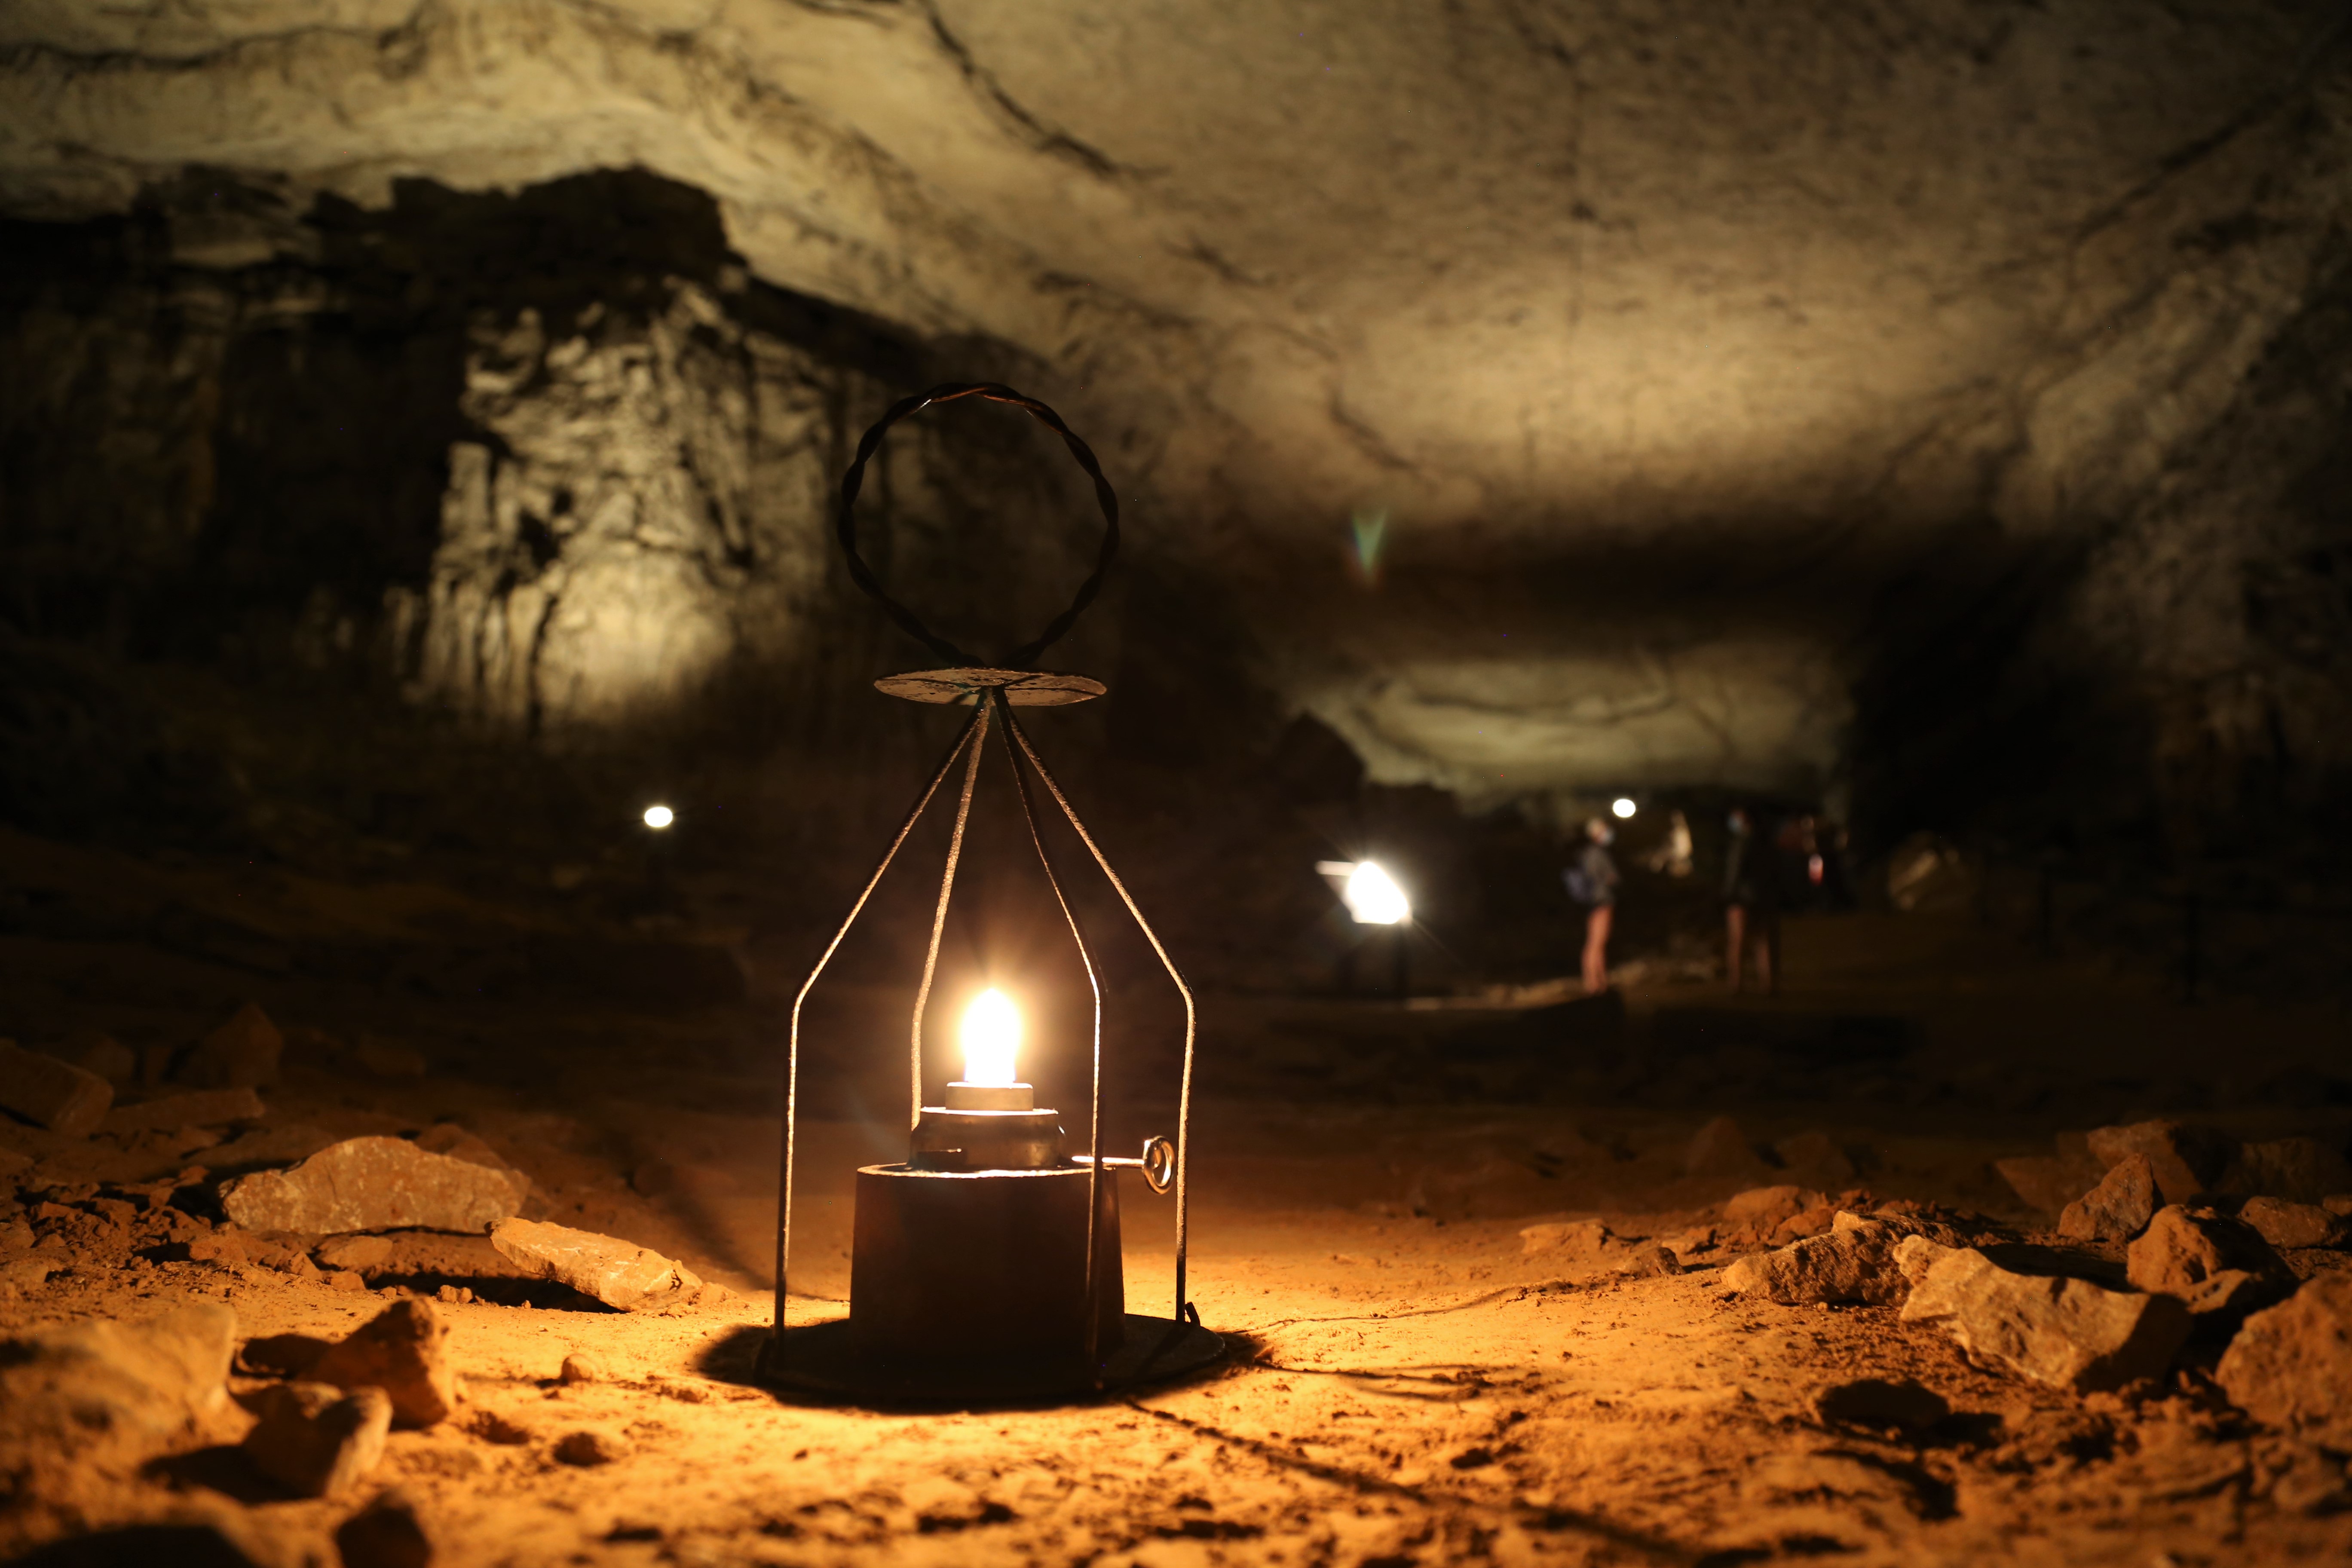 An open flame wire lantern glows in a large dark and rocky cave room